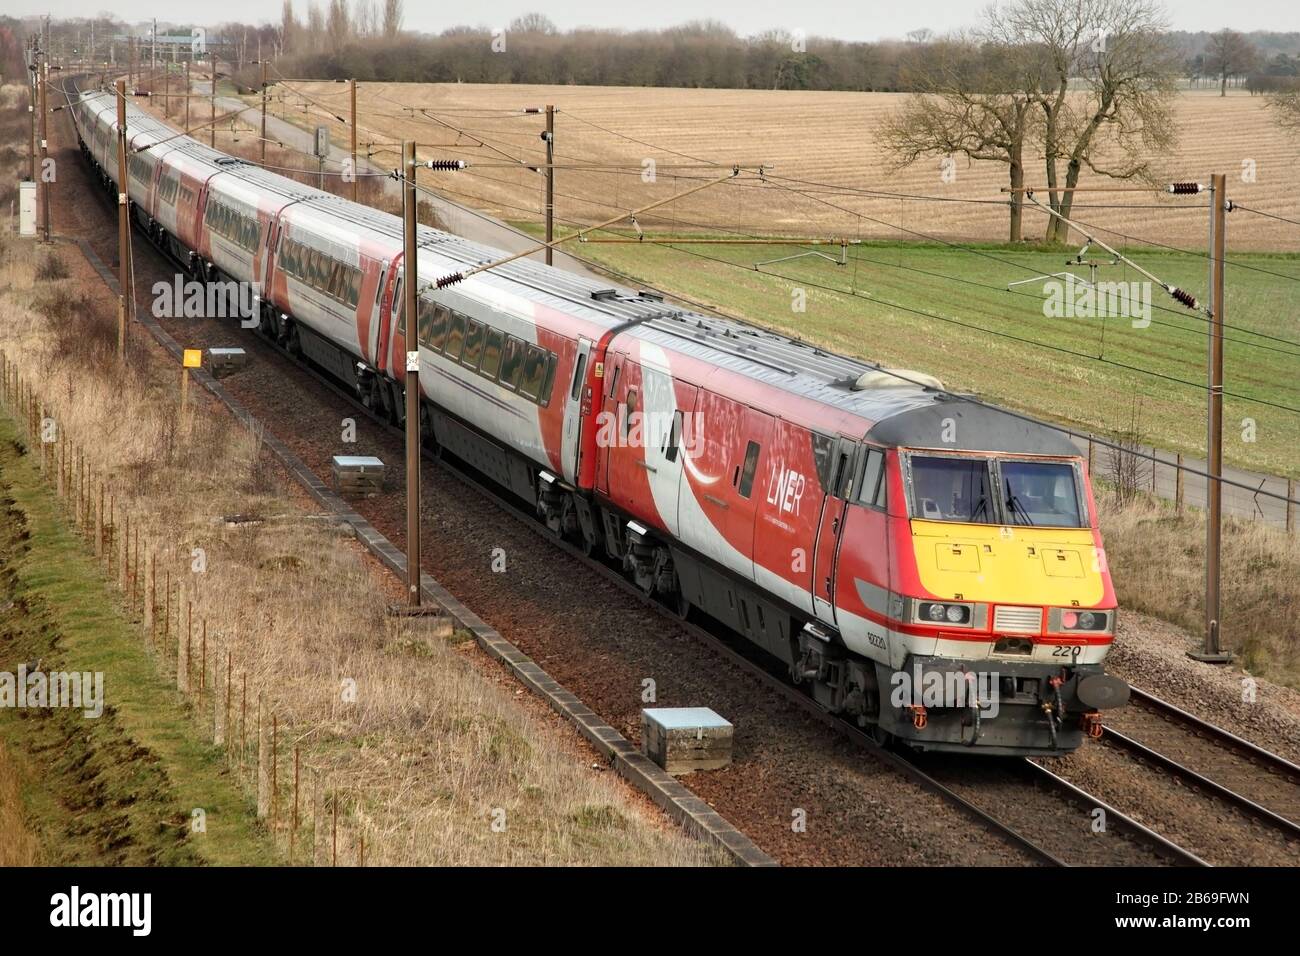 Northbound LNER train passing Colton junction shortly before its arrival in York, UK. Stock Photo